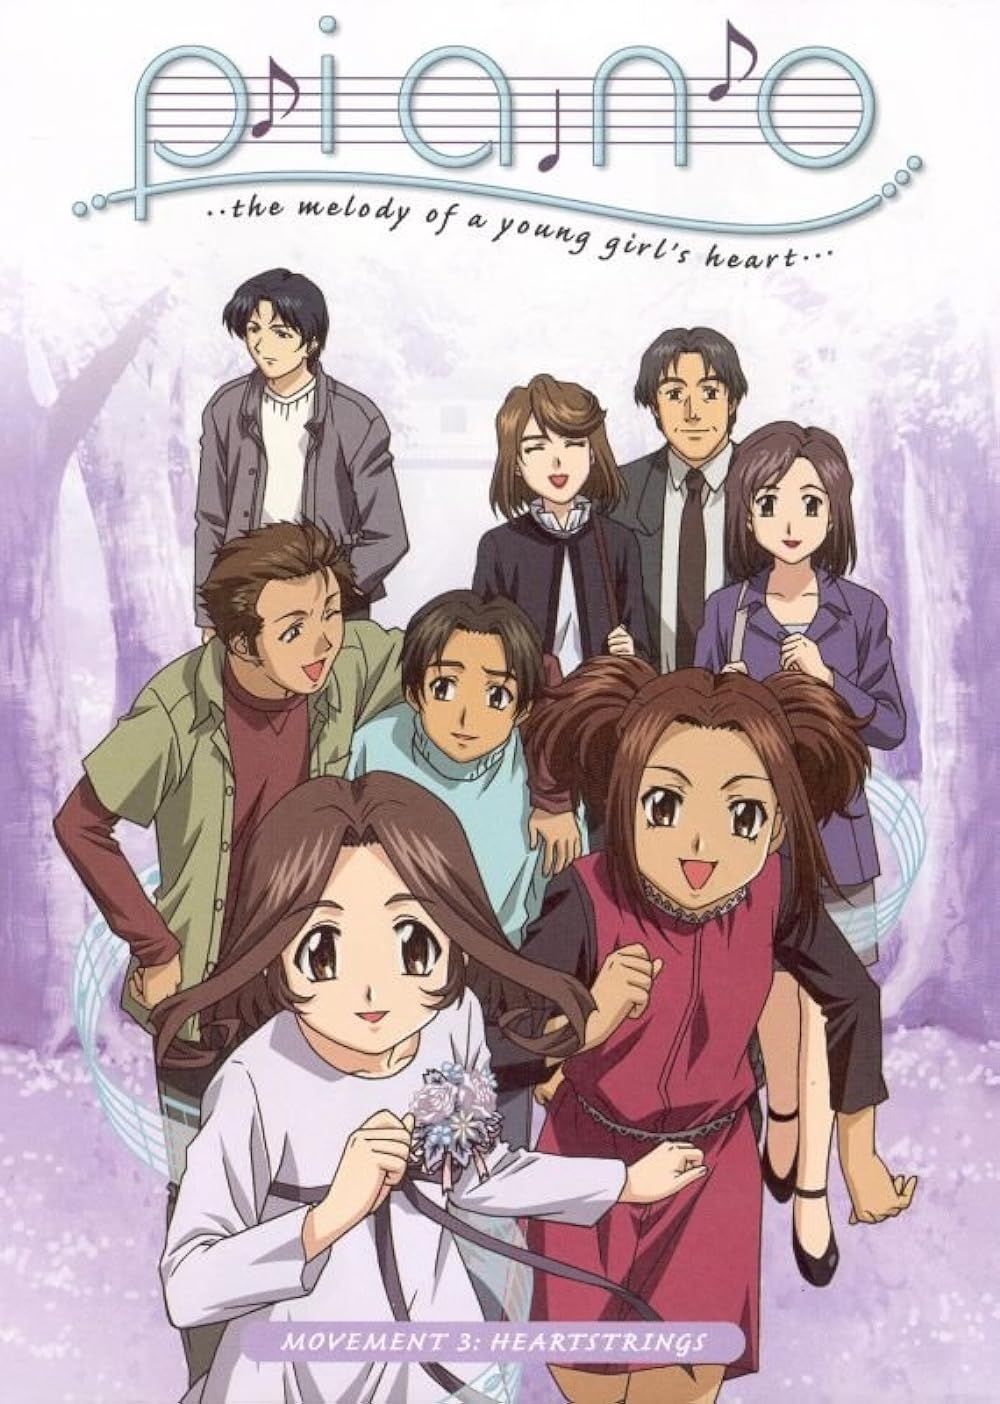 Poster for Piano- The Melody of a Young Girl's Heart with all the main characters